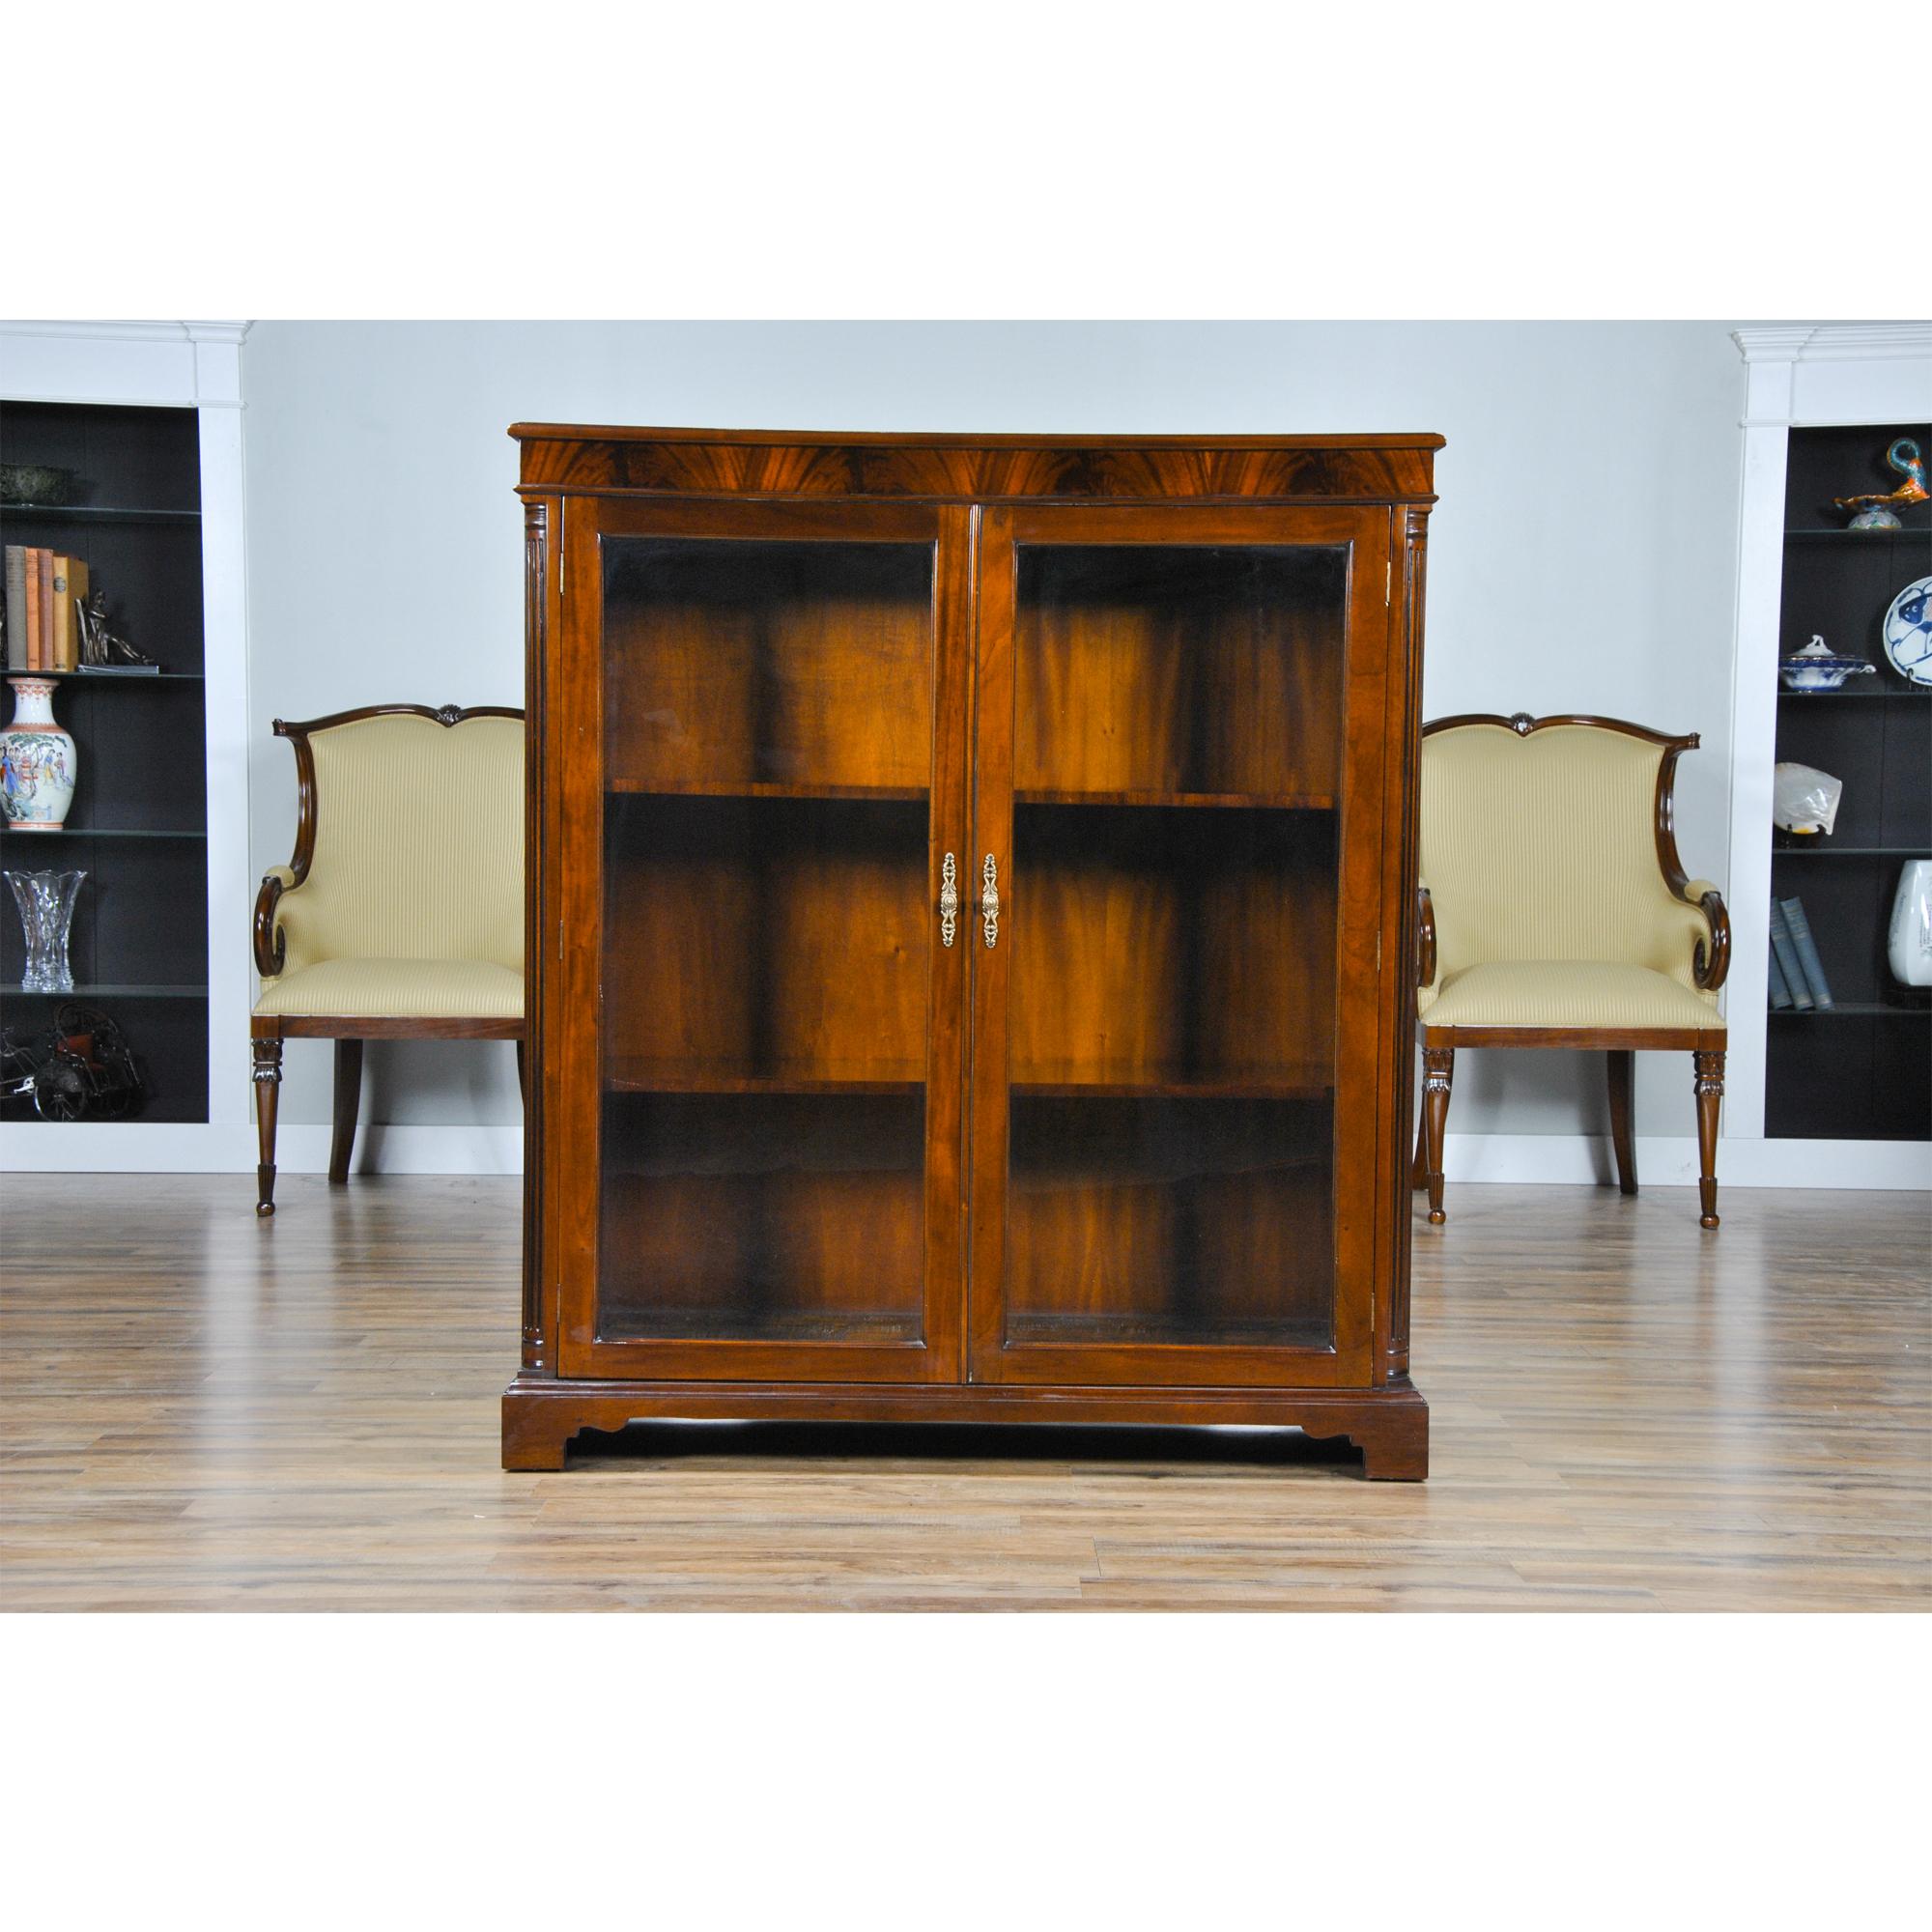 This Mahogany Two Door Bookcase from Niagara Furniture can be used to display your most valued collectables. This bookcase is a perfect size to fit in most rooms and the reeded corner columns, bracket feet match many of the other pieces of Niagara